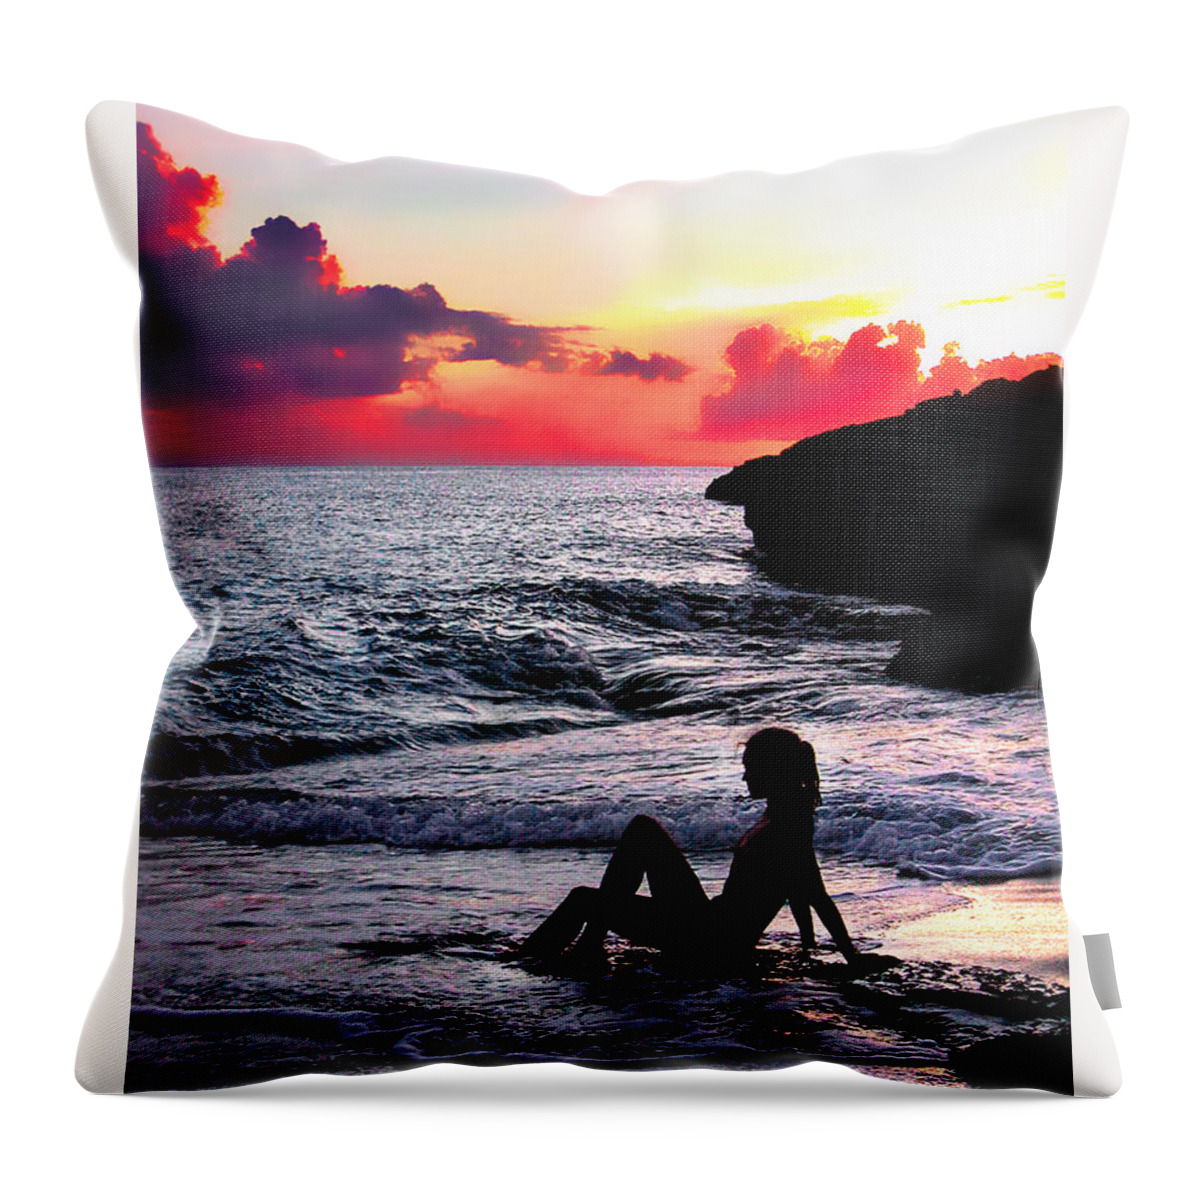 Caribbean Throw Pillow featuring the photograph Licked by the waves by Worldwide Photography